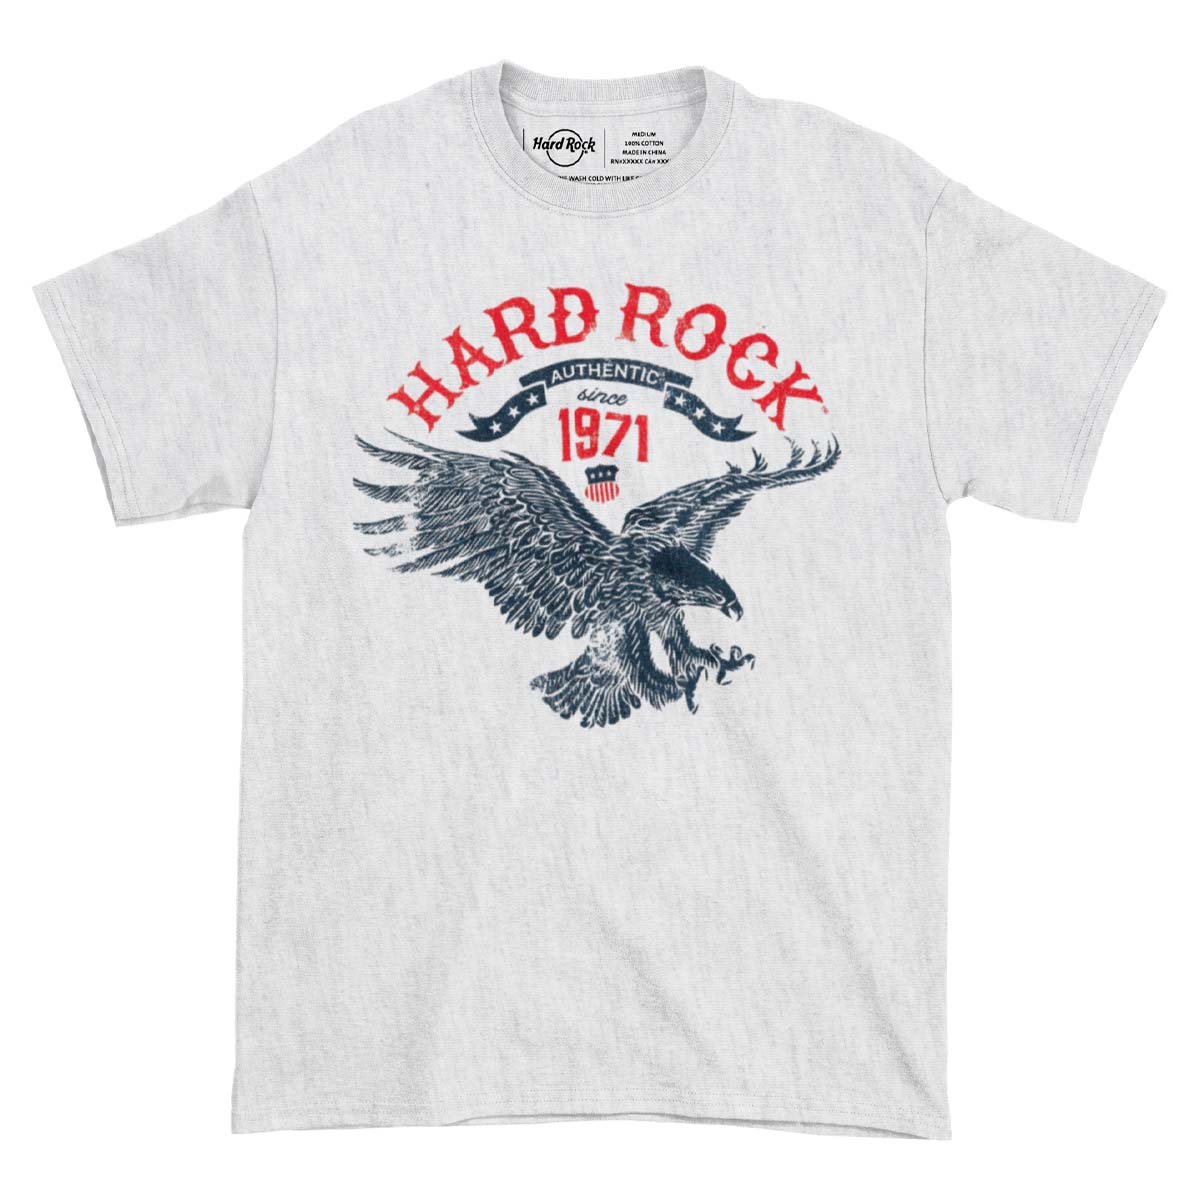 Americana Adult Fit Grey Tee with Flying Eagle Logo Motif image number 4